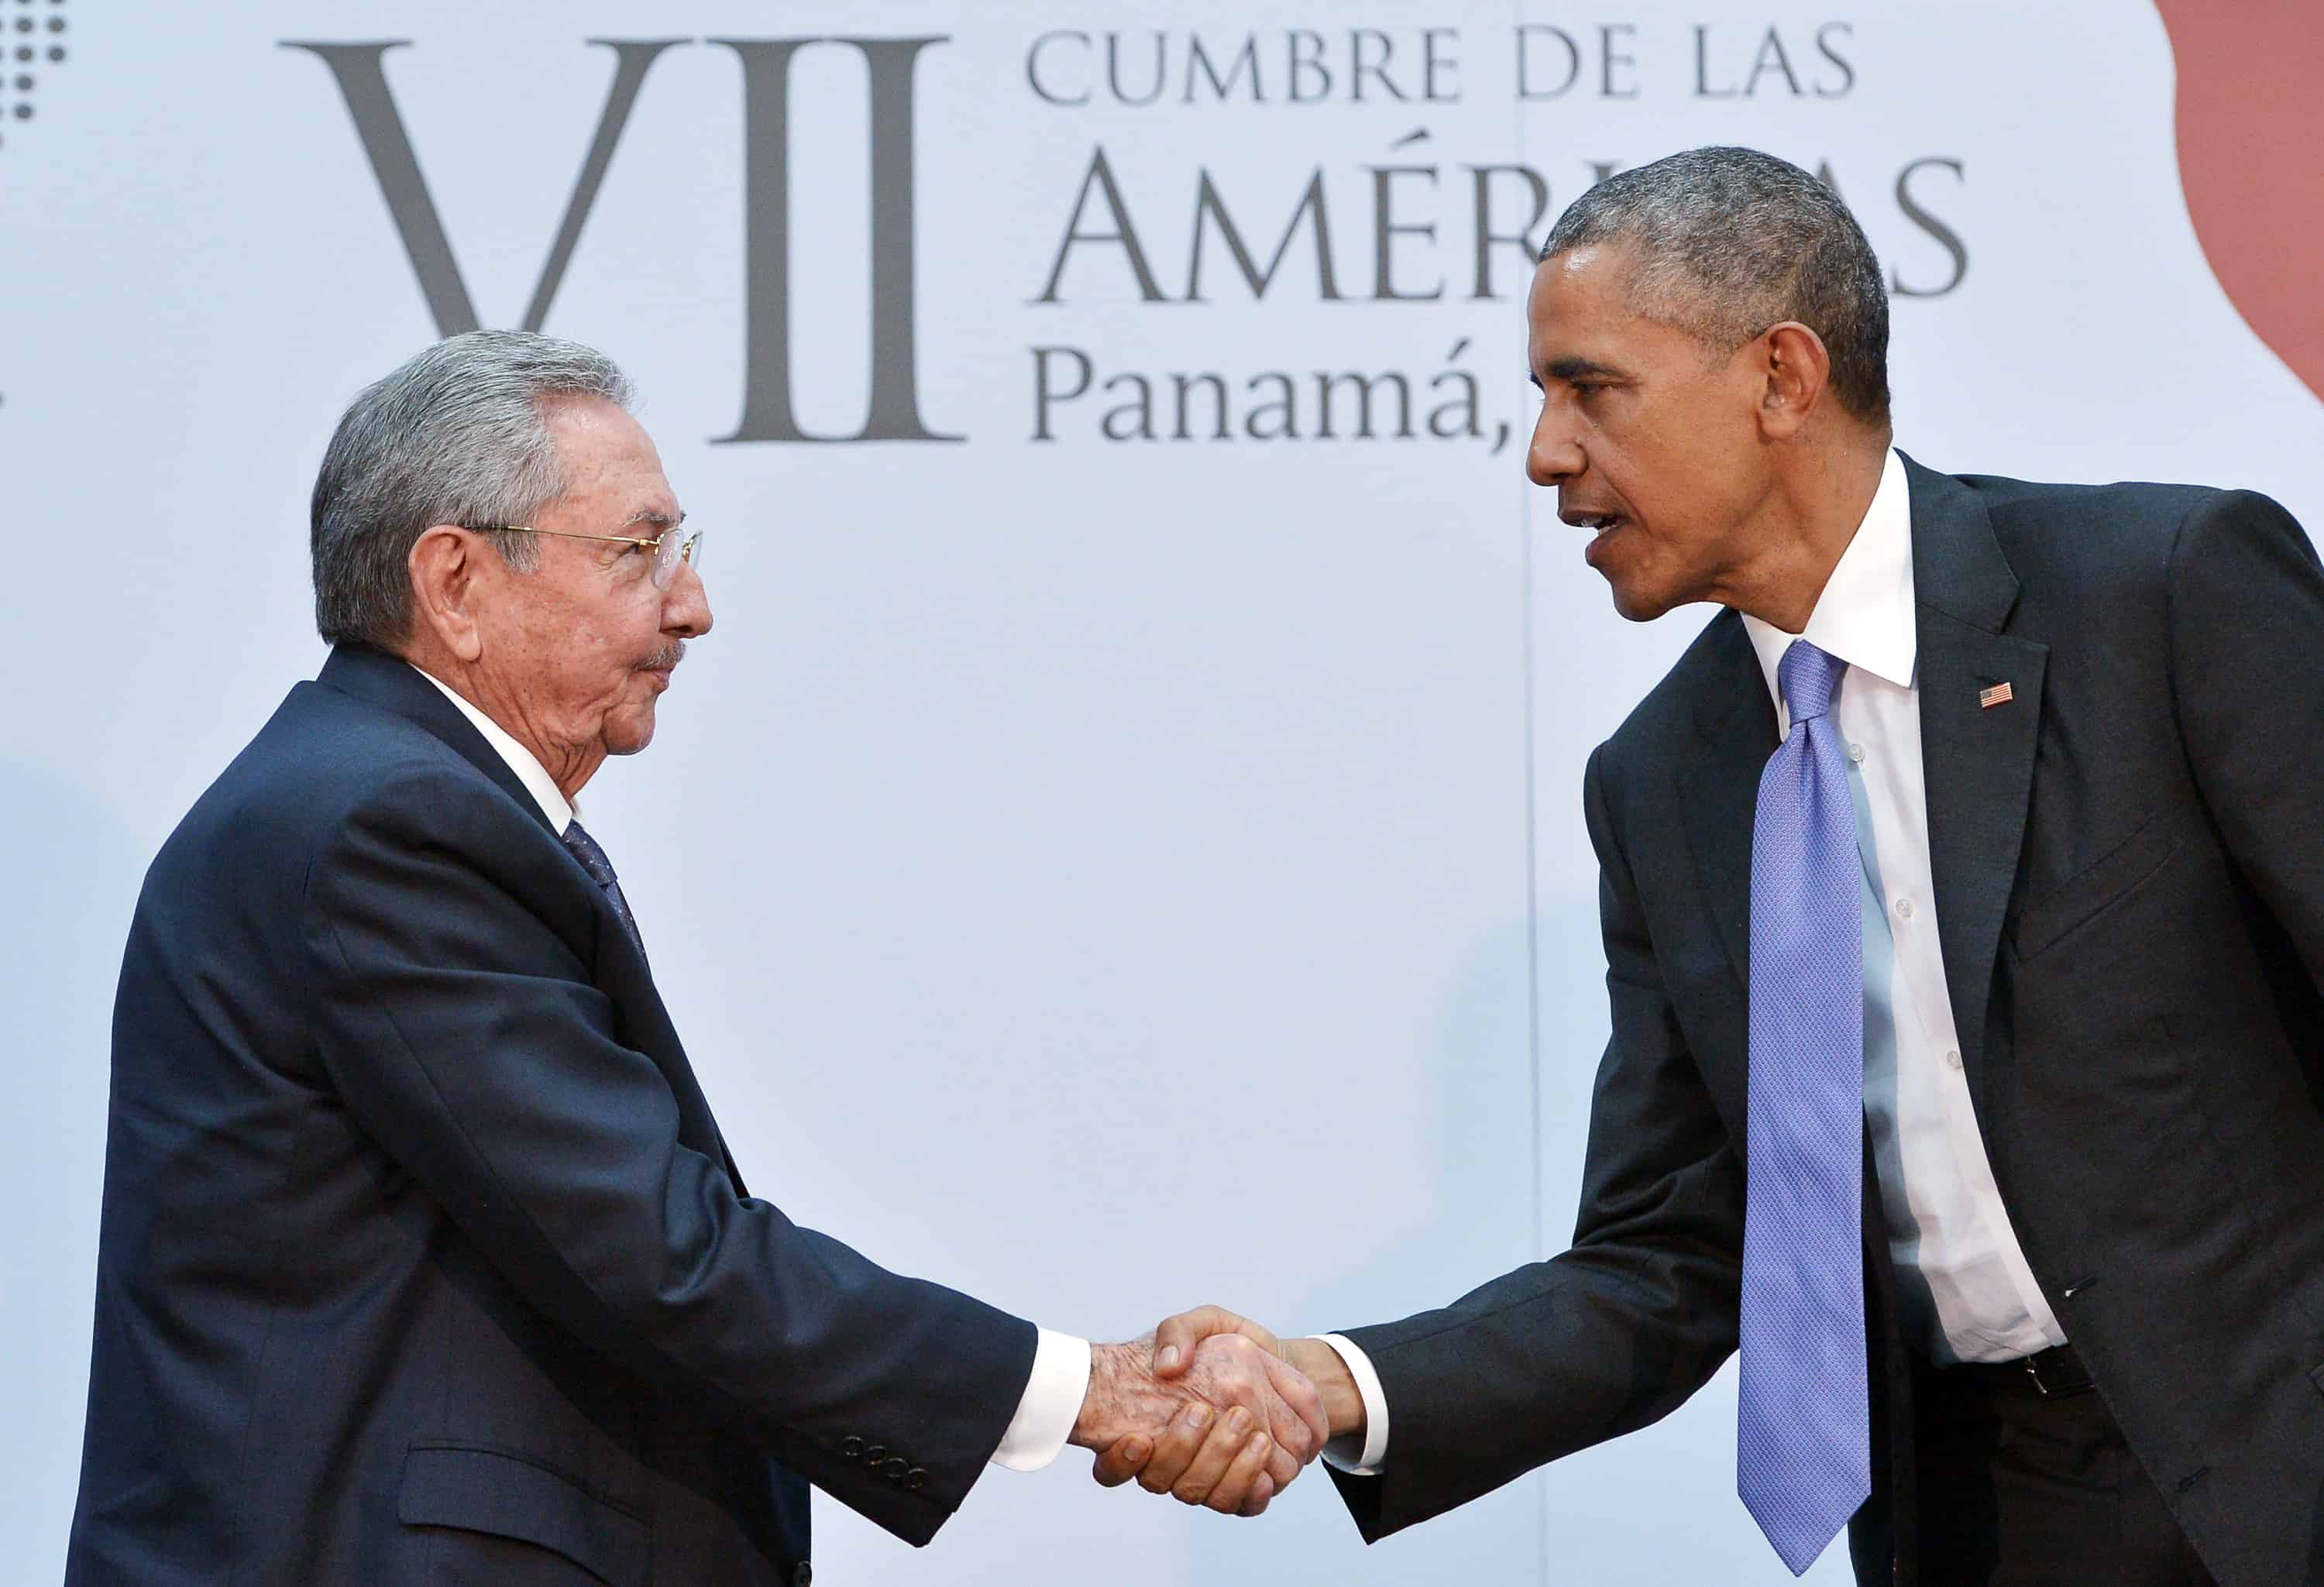 U.S. President Barack Obama shakes hands with Cuba's President Raul Castro during a meeting on the sidelines of the Summit of the Americas at the ATLAPA Convention center on April 11, 2015 in Panama City.